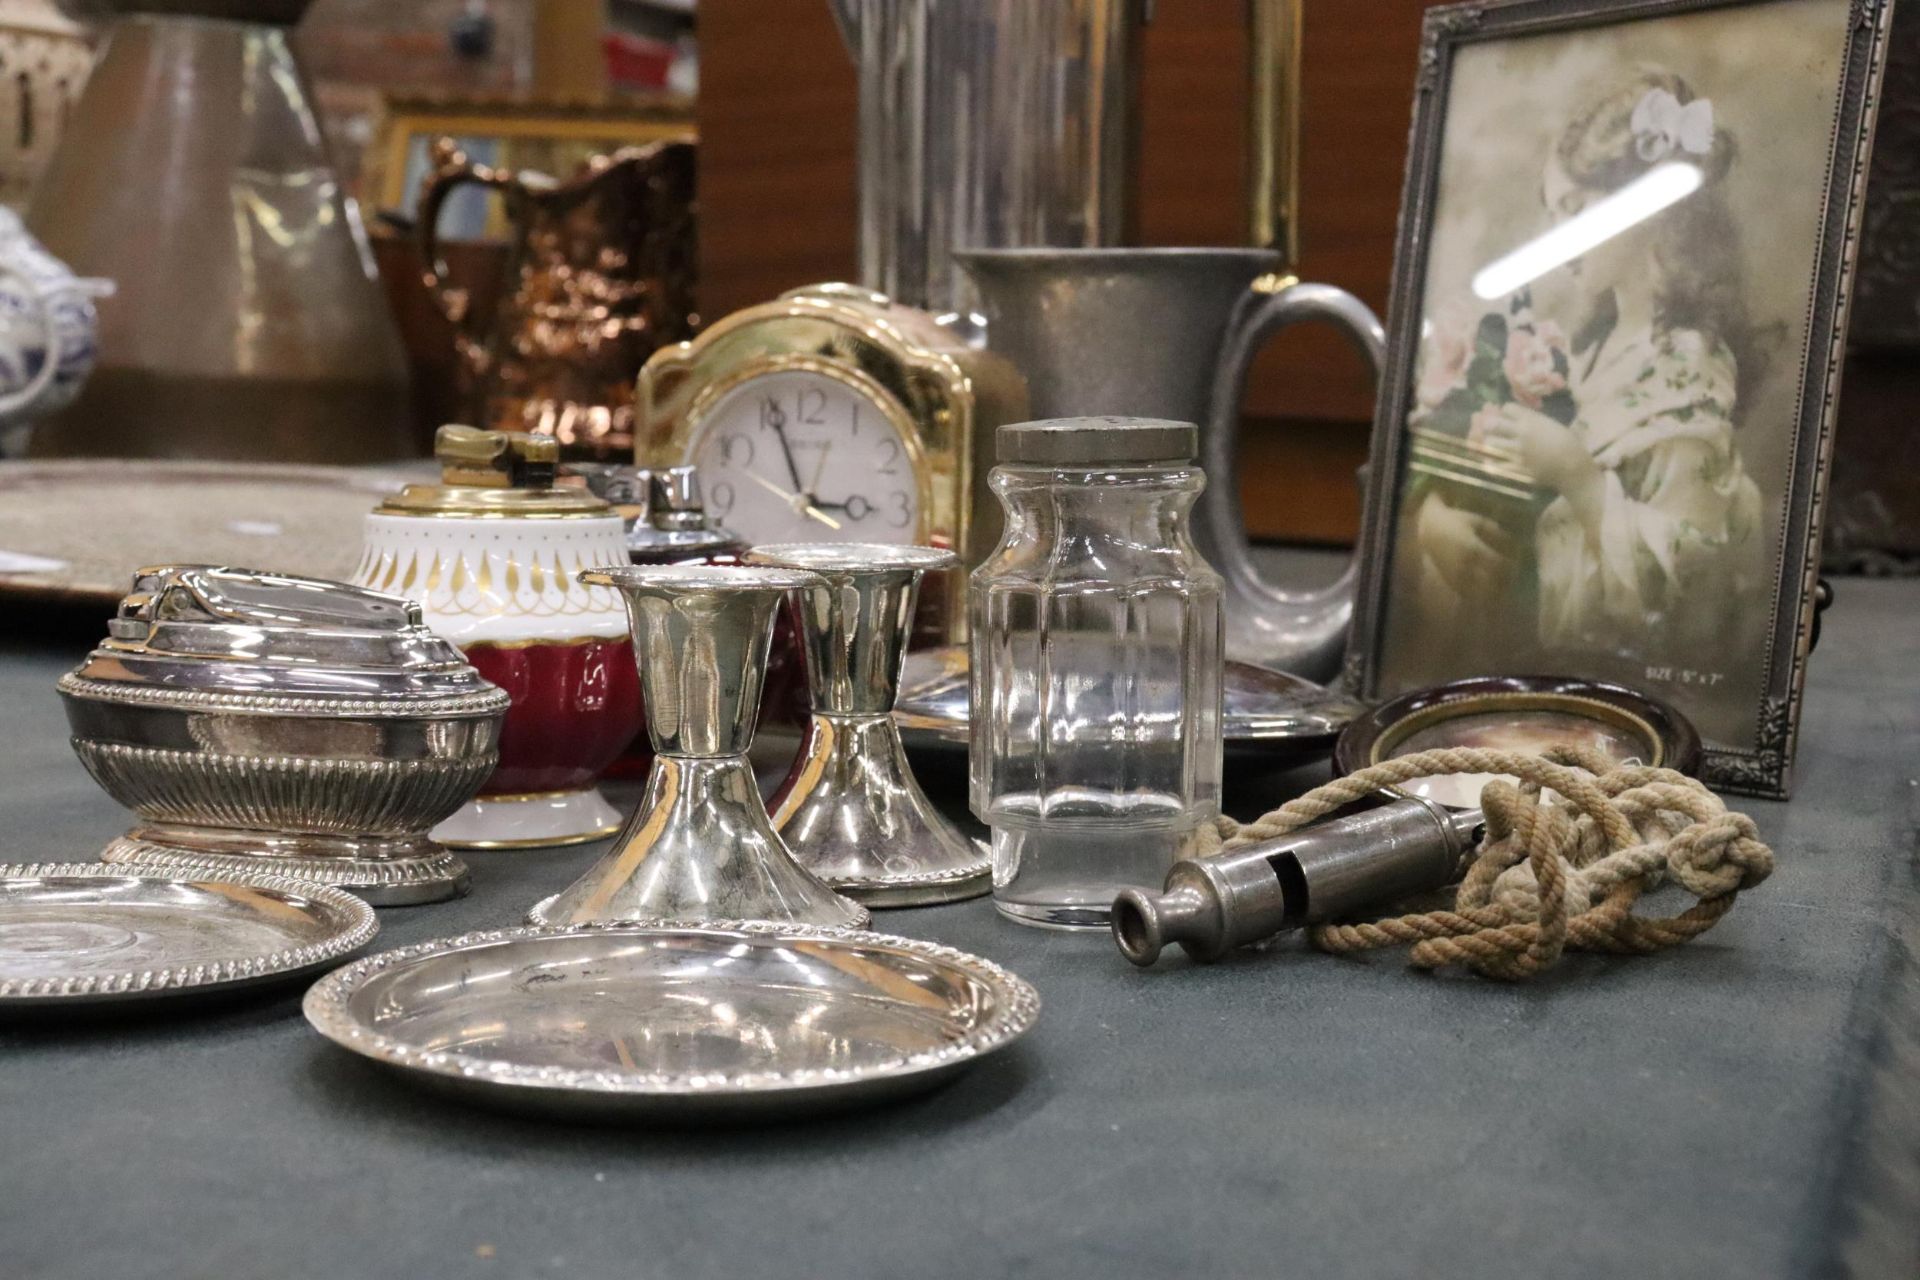 A QUANTITY OF ITEMS TO INCLUDE A CHROME ITALIAN COFFEE POT, TABLE LIGHTERS, CANDLE STICKS, A HIP - Image 6 of 9